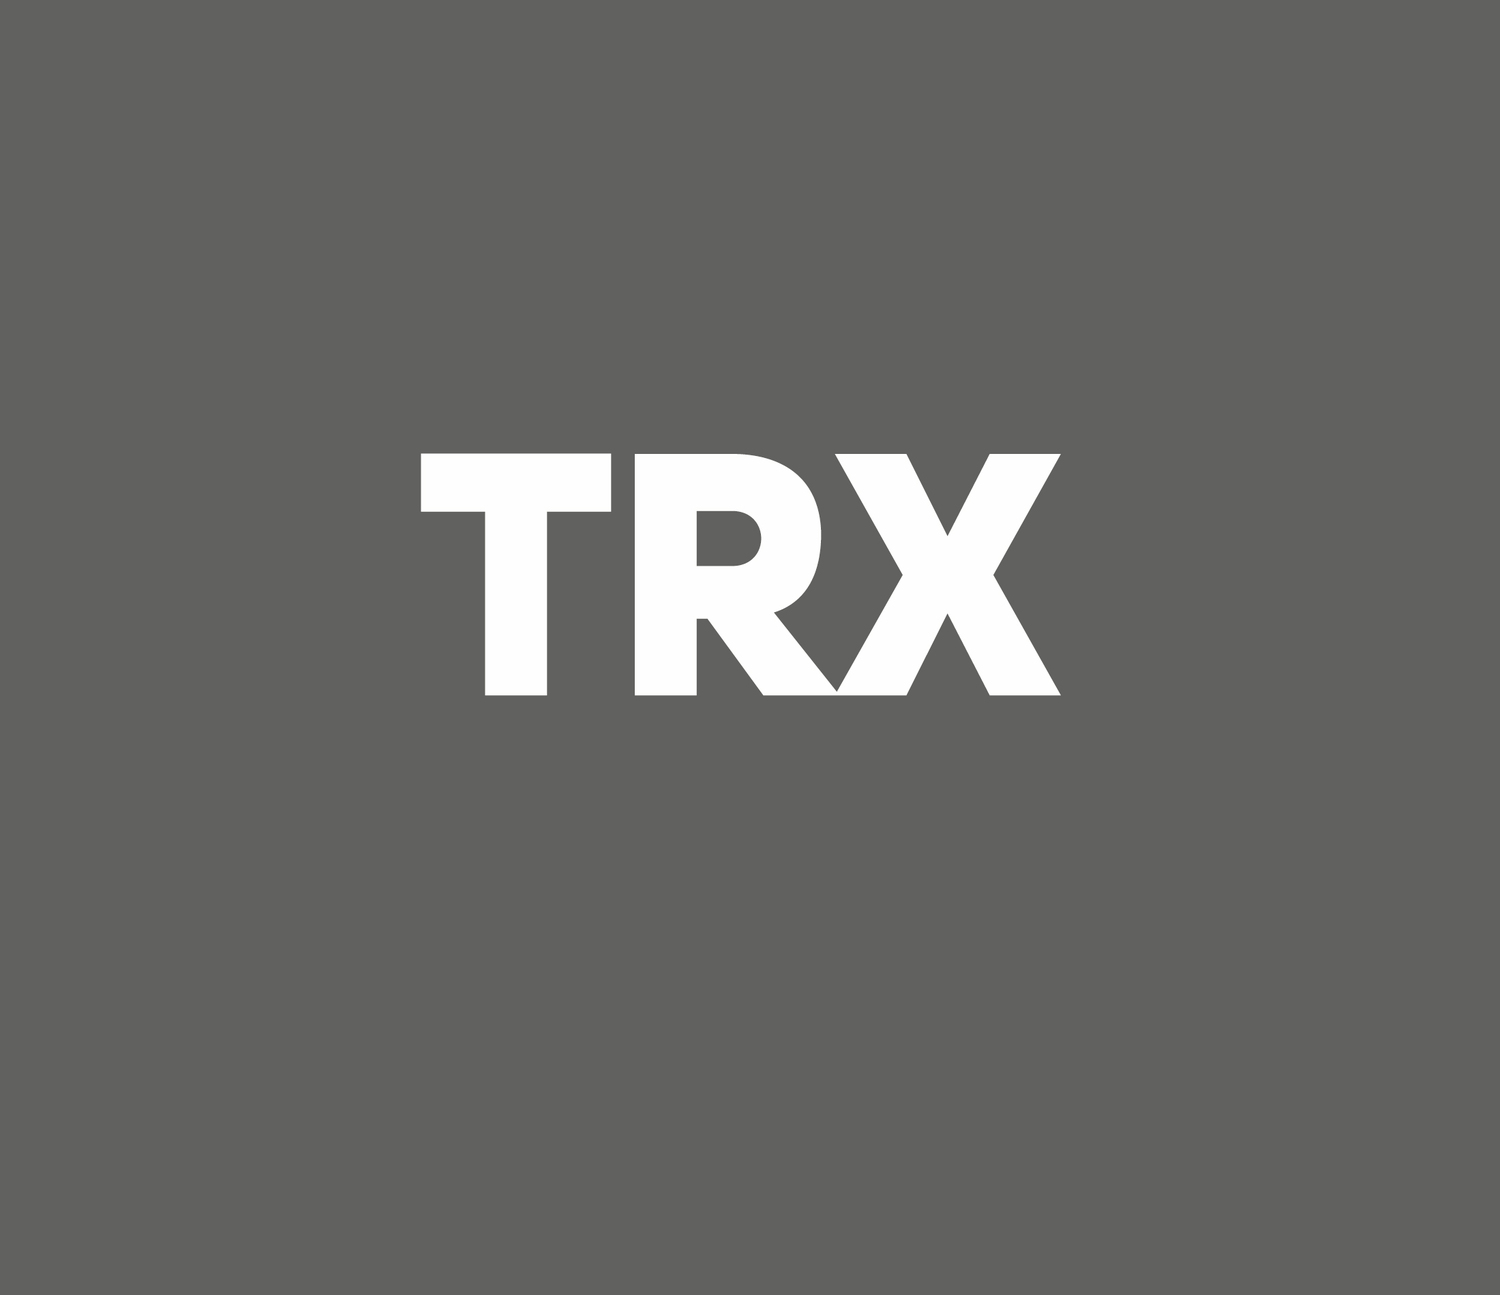 <span style="font-weight: bold;">TRX&nbsp;</span><br>